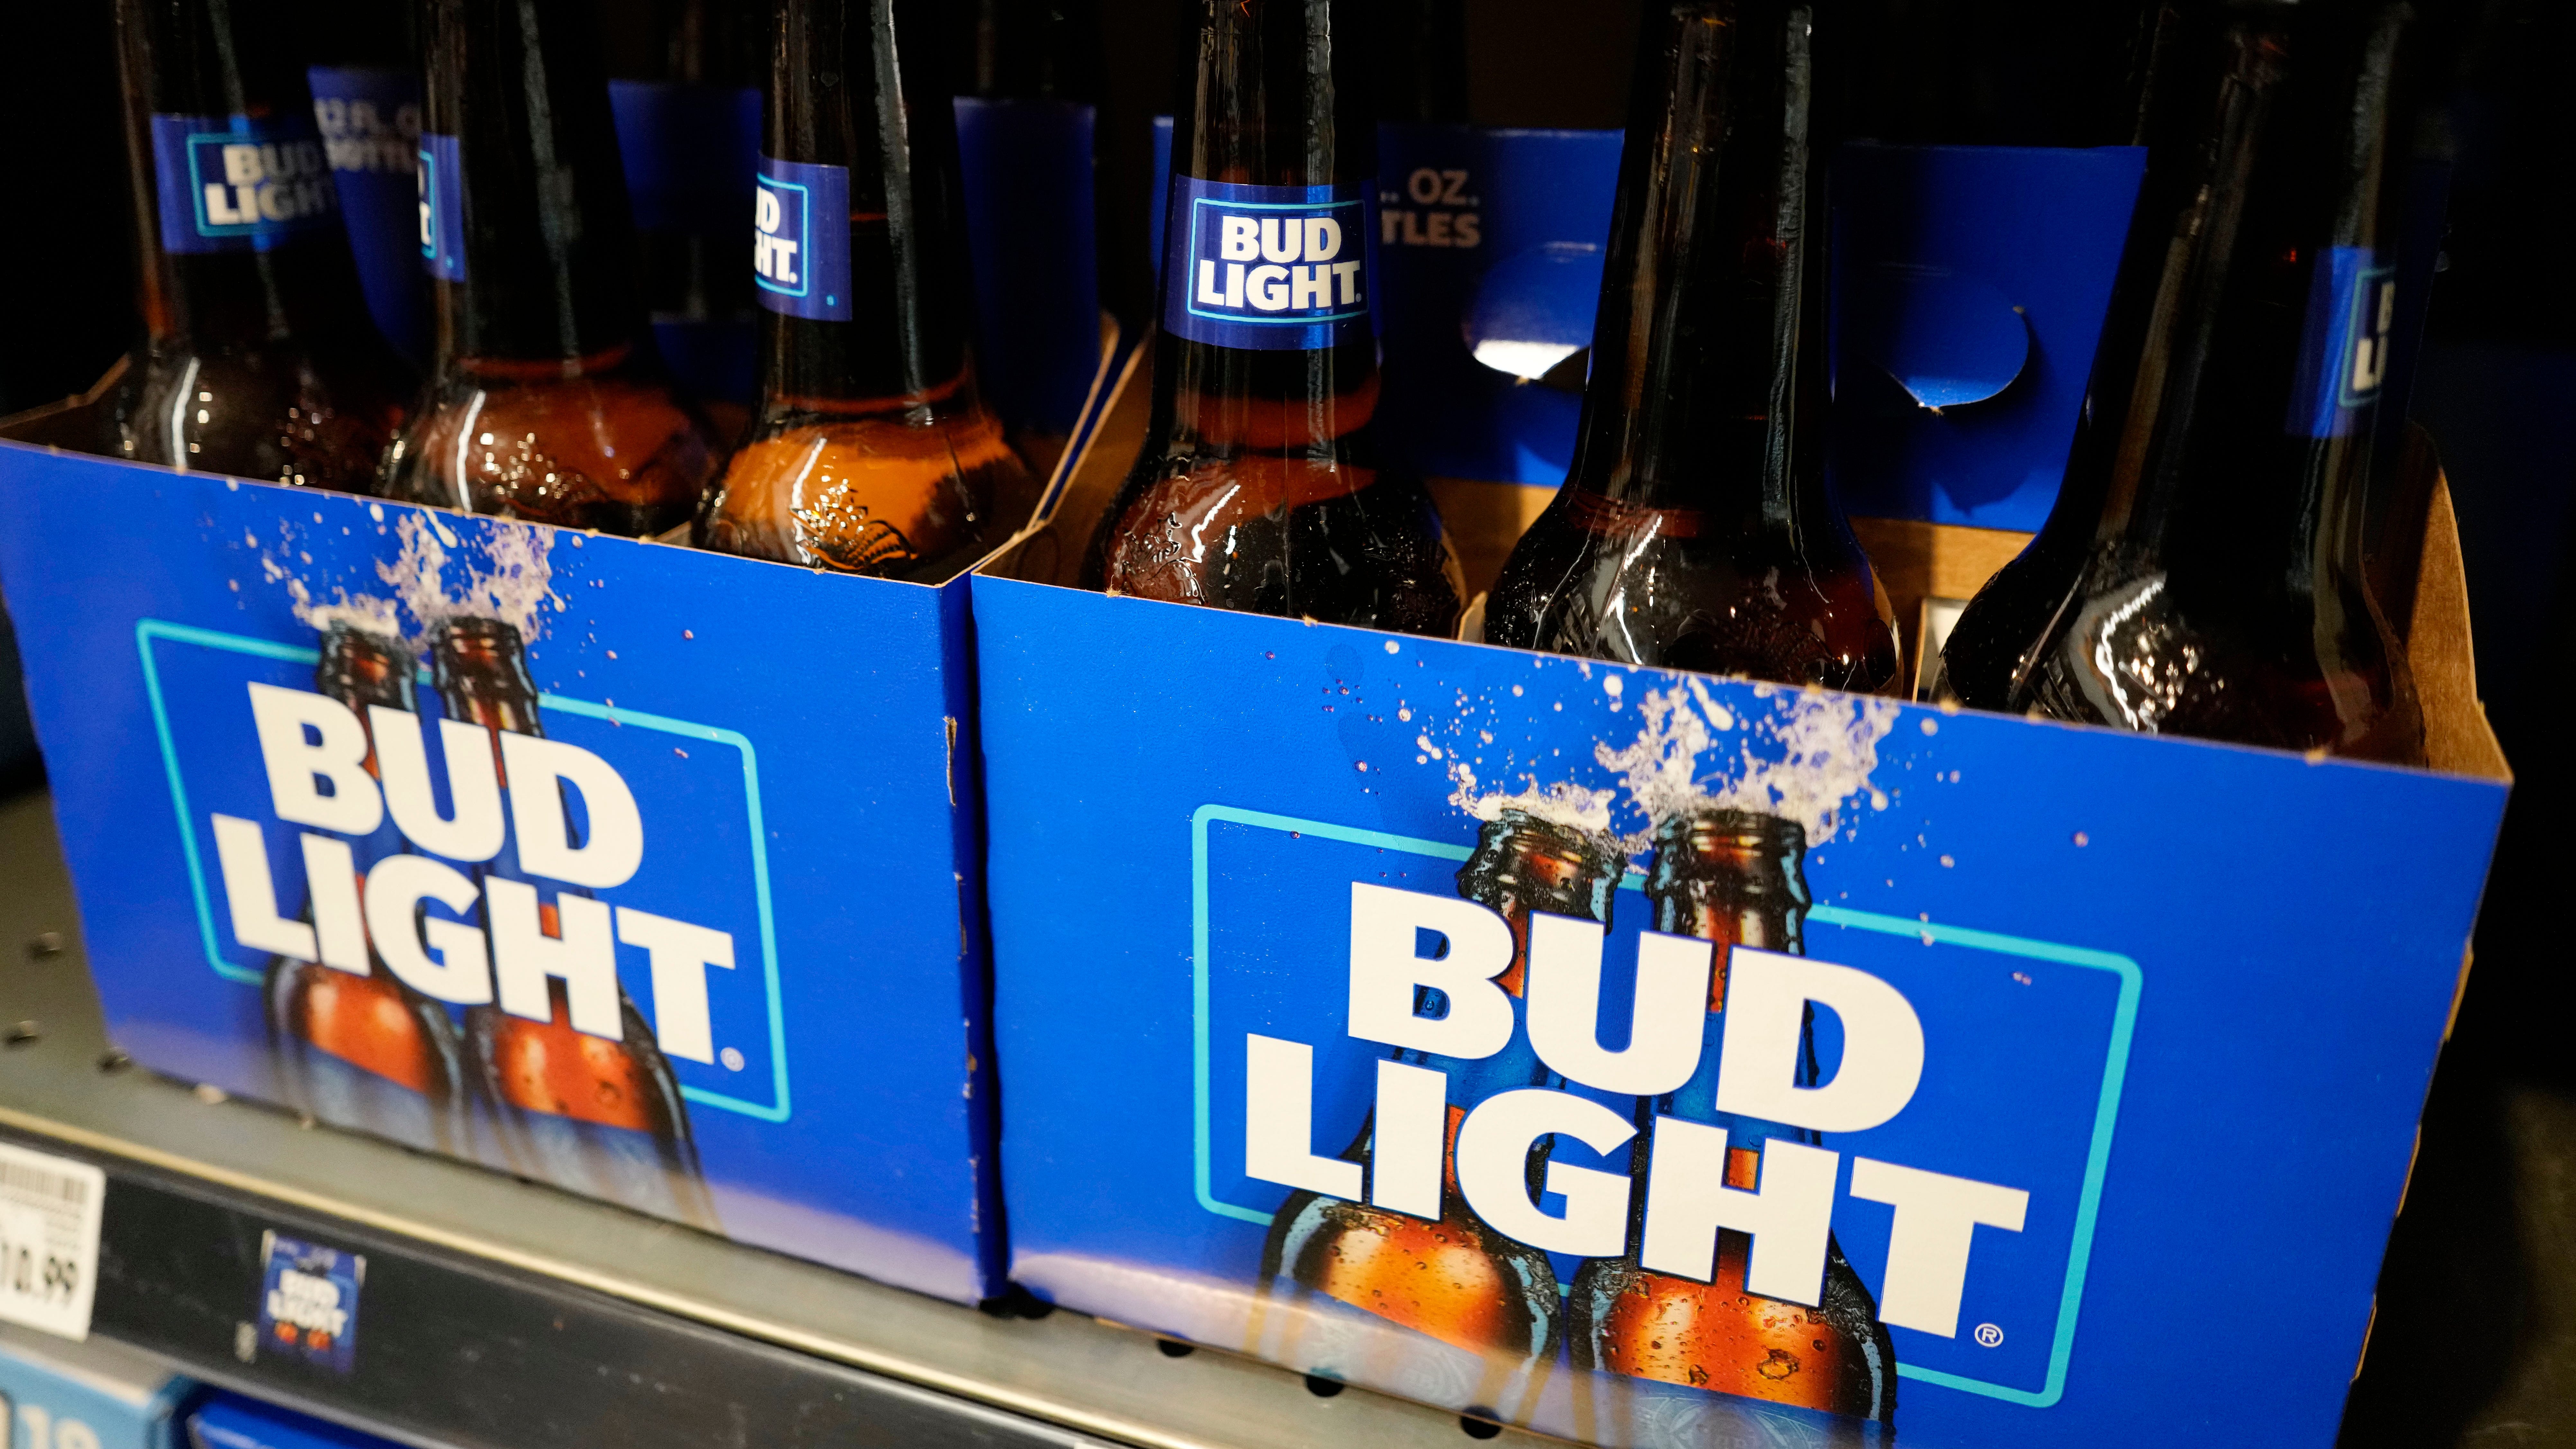 Bottles of Bud Light beer are seen at a grocery store in Glenview, Ill., Tuesday, April 25, 2023.